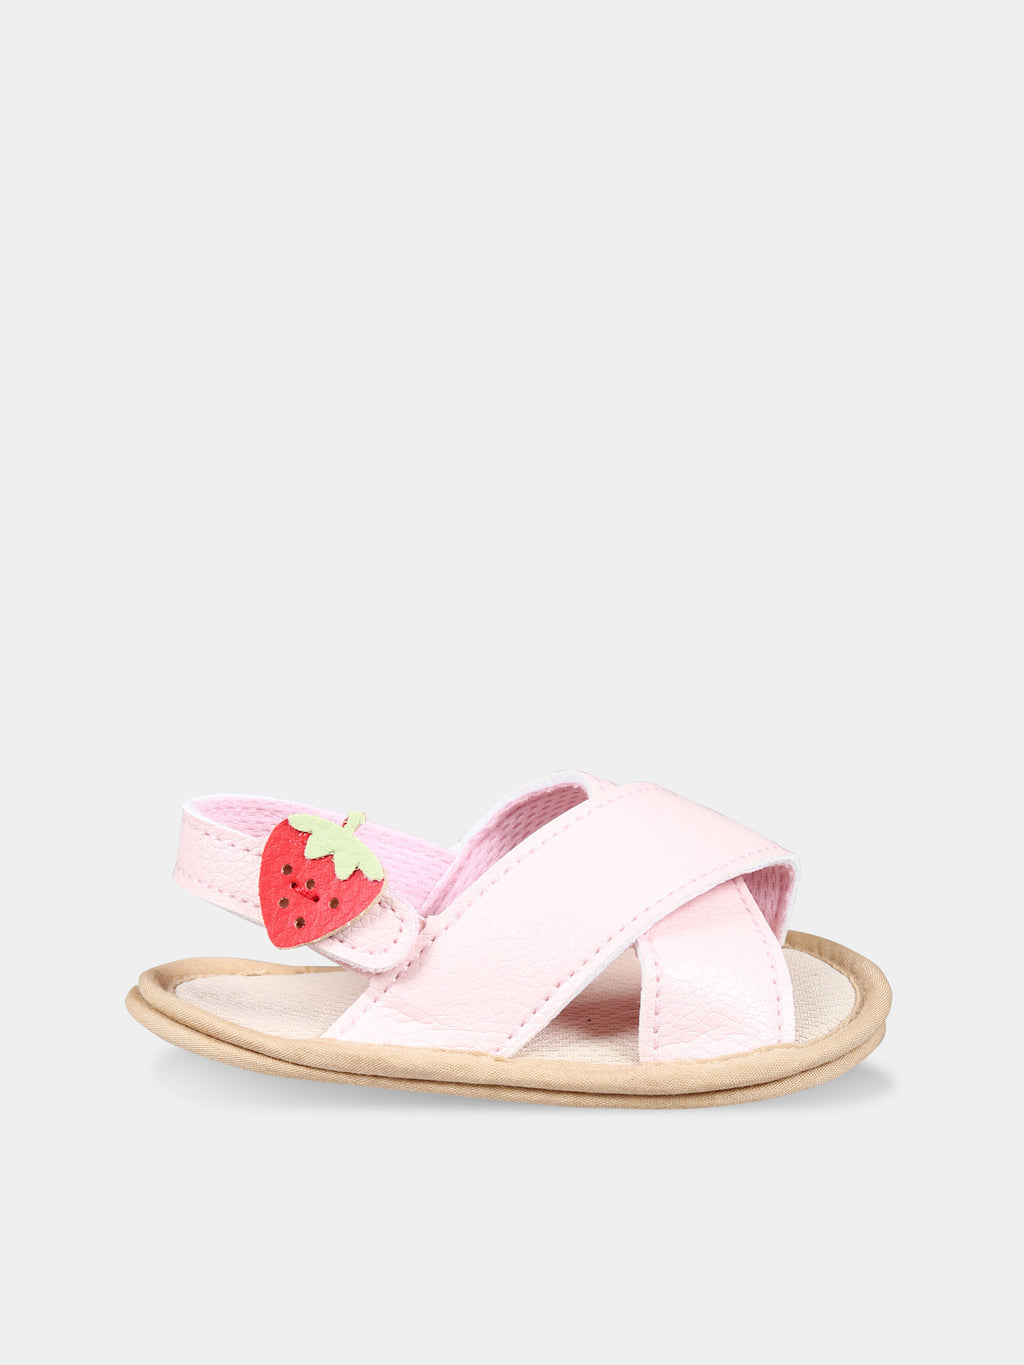 Pink sandals for baby girl with strawberry